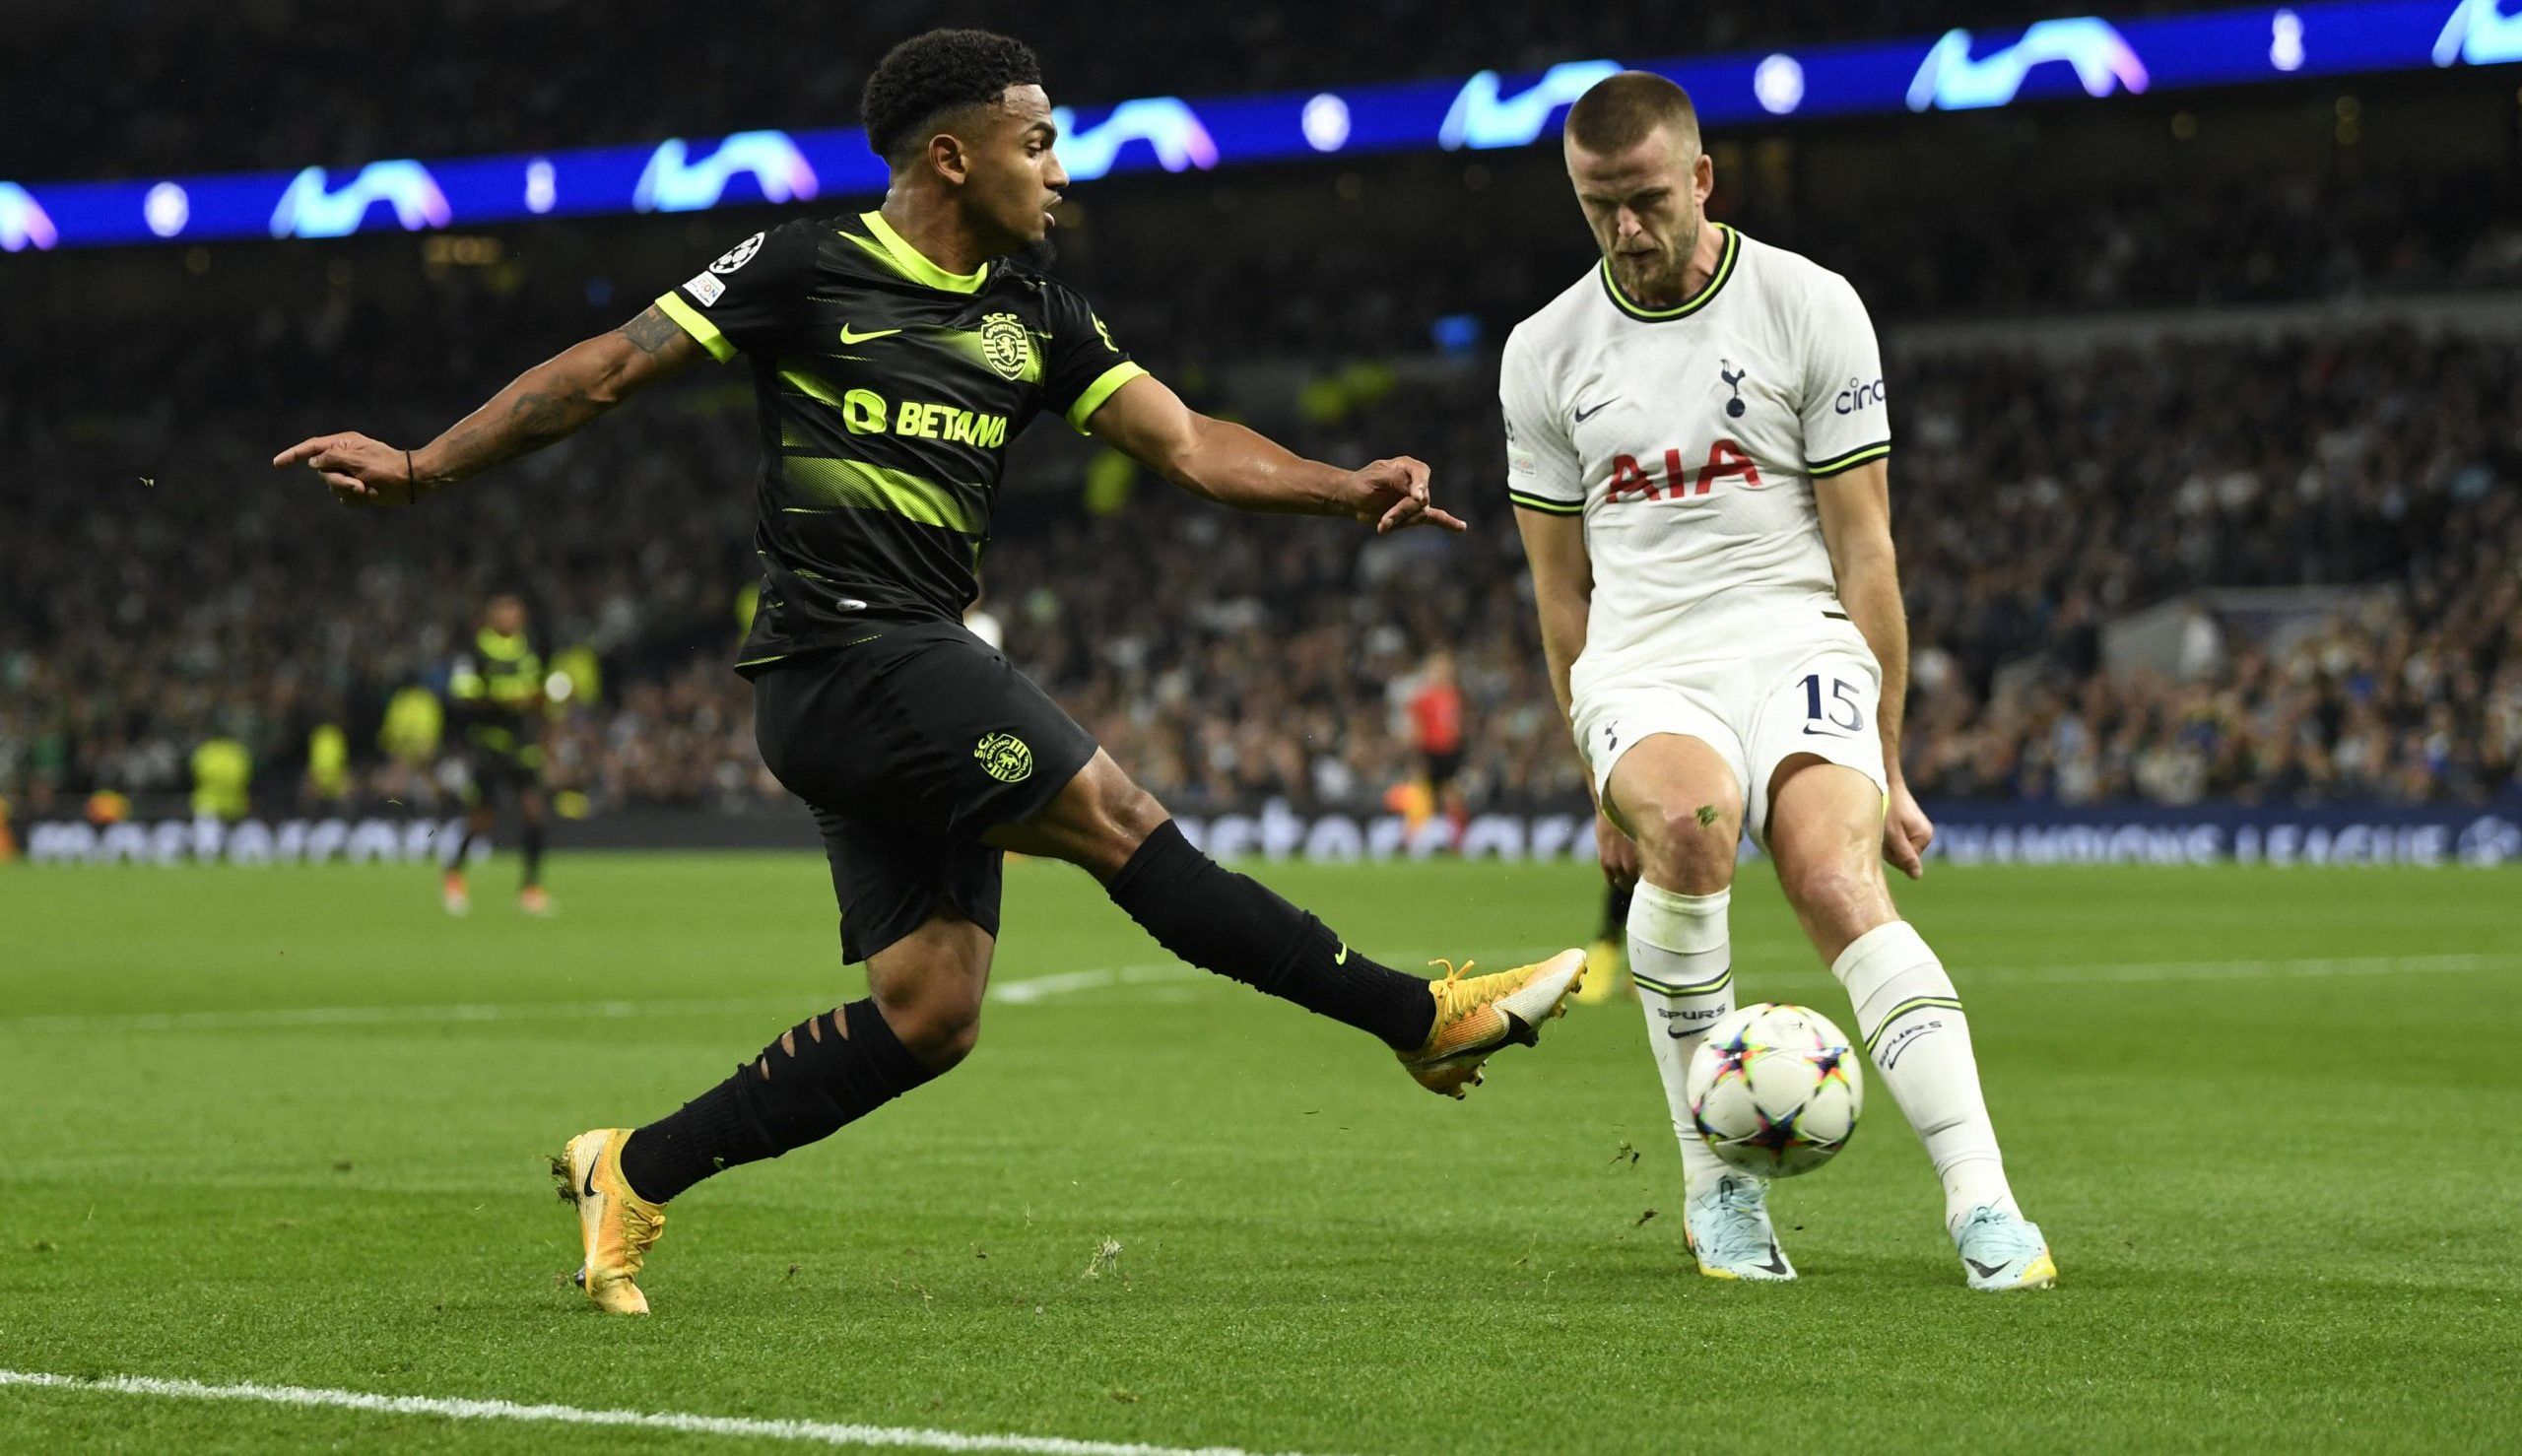 Sporting CP's Marcus Edwards in action with Tottenham Hotspur's Eric Dier